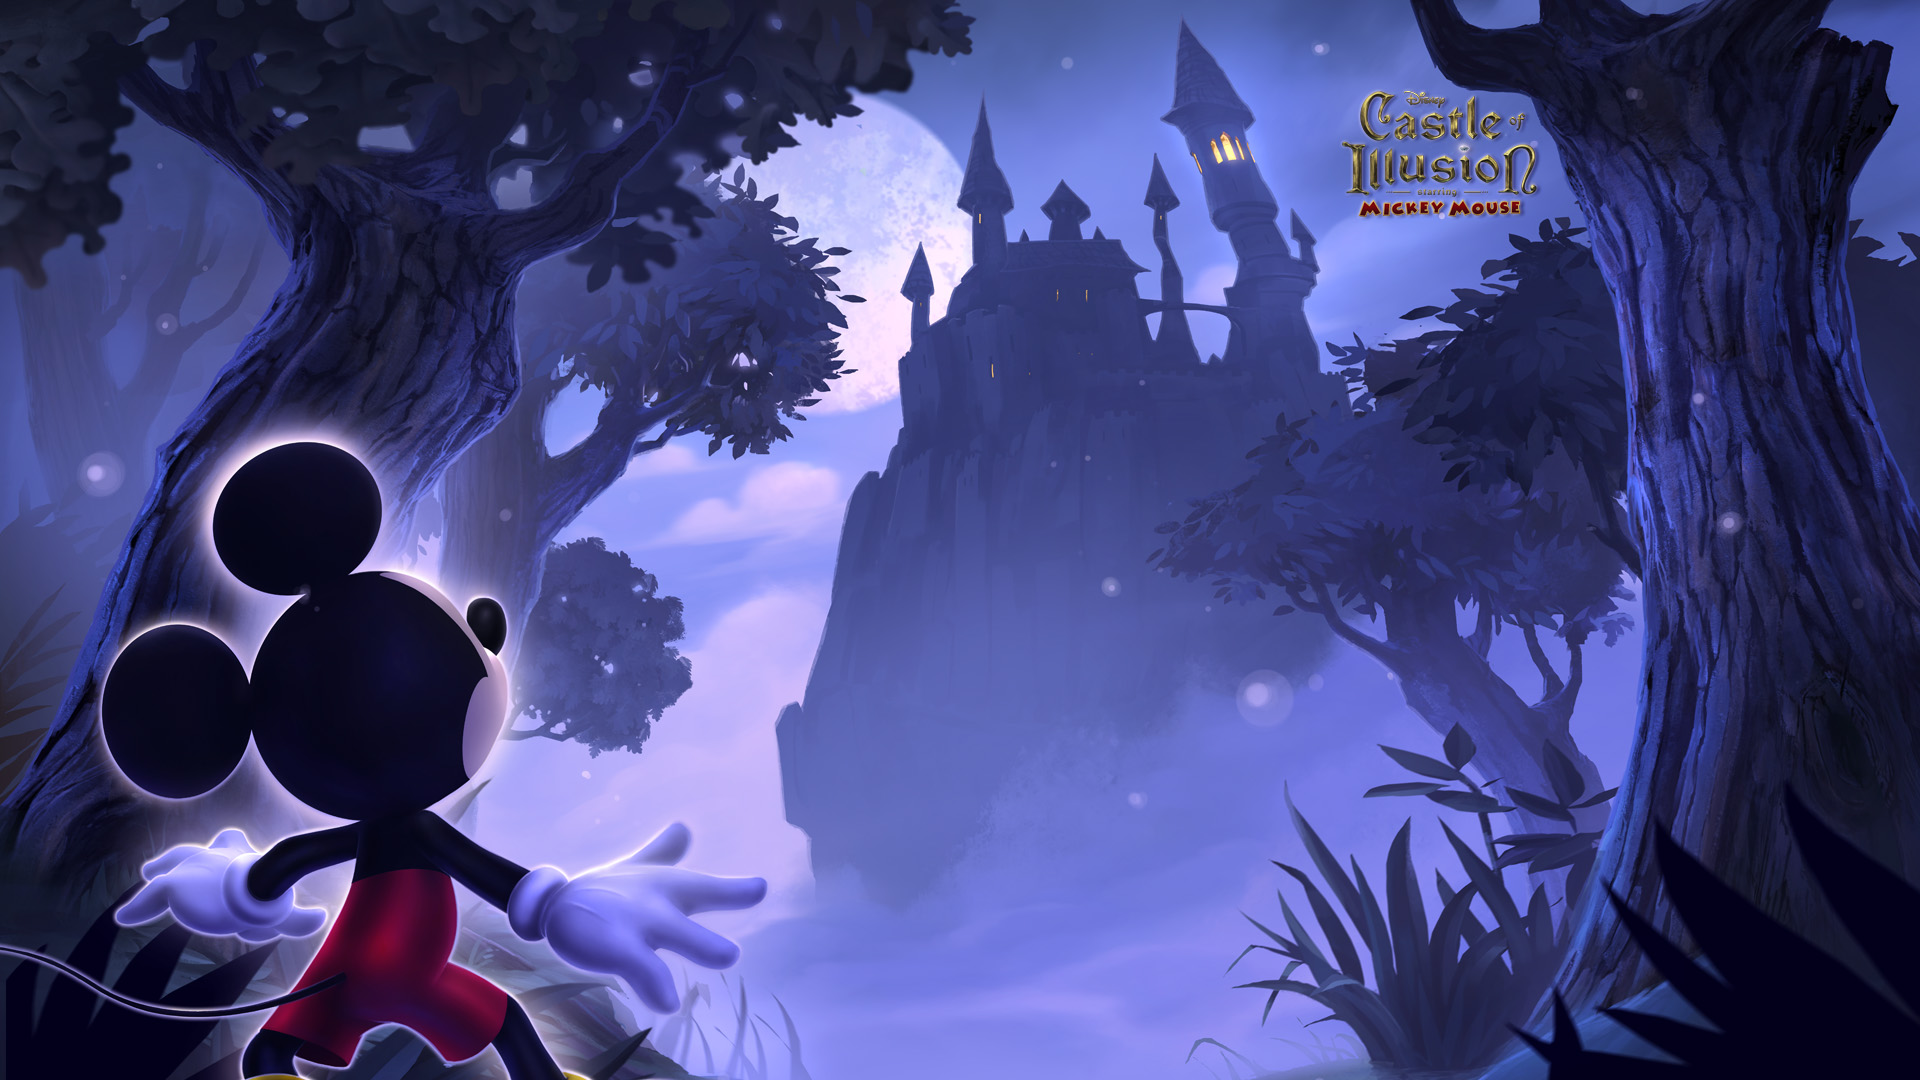 1080p Castle Of Illusion Remastered Wallpaper